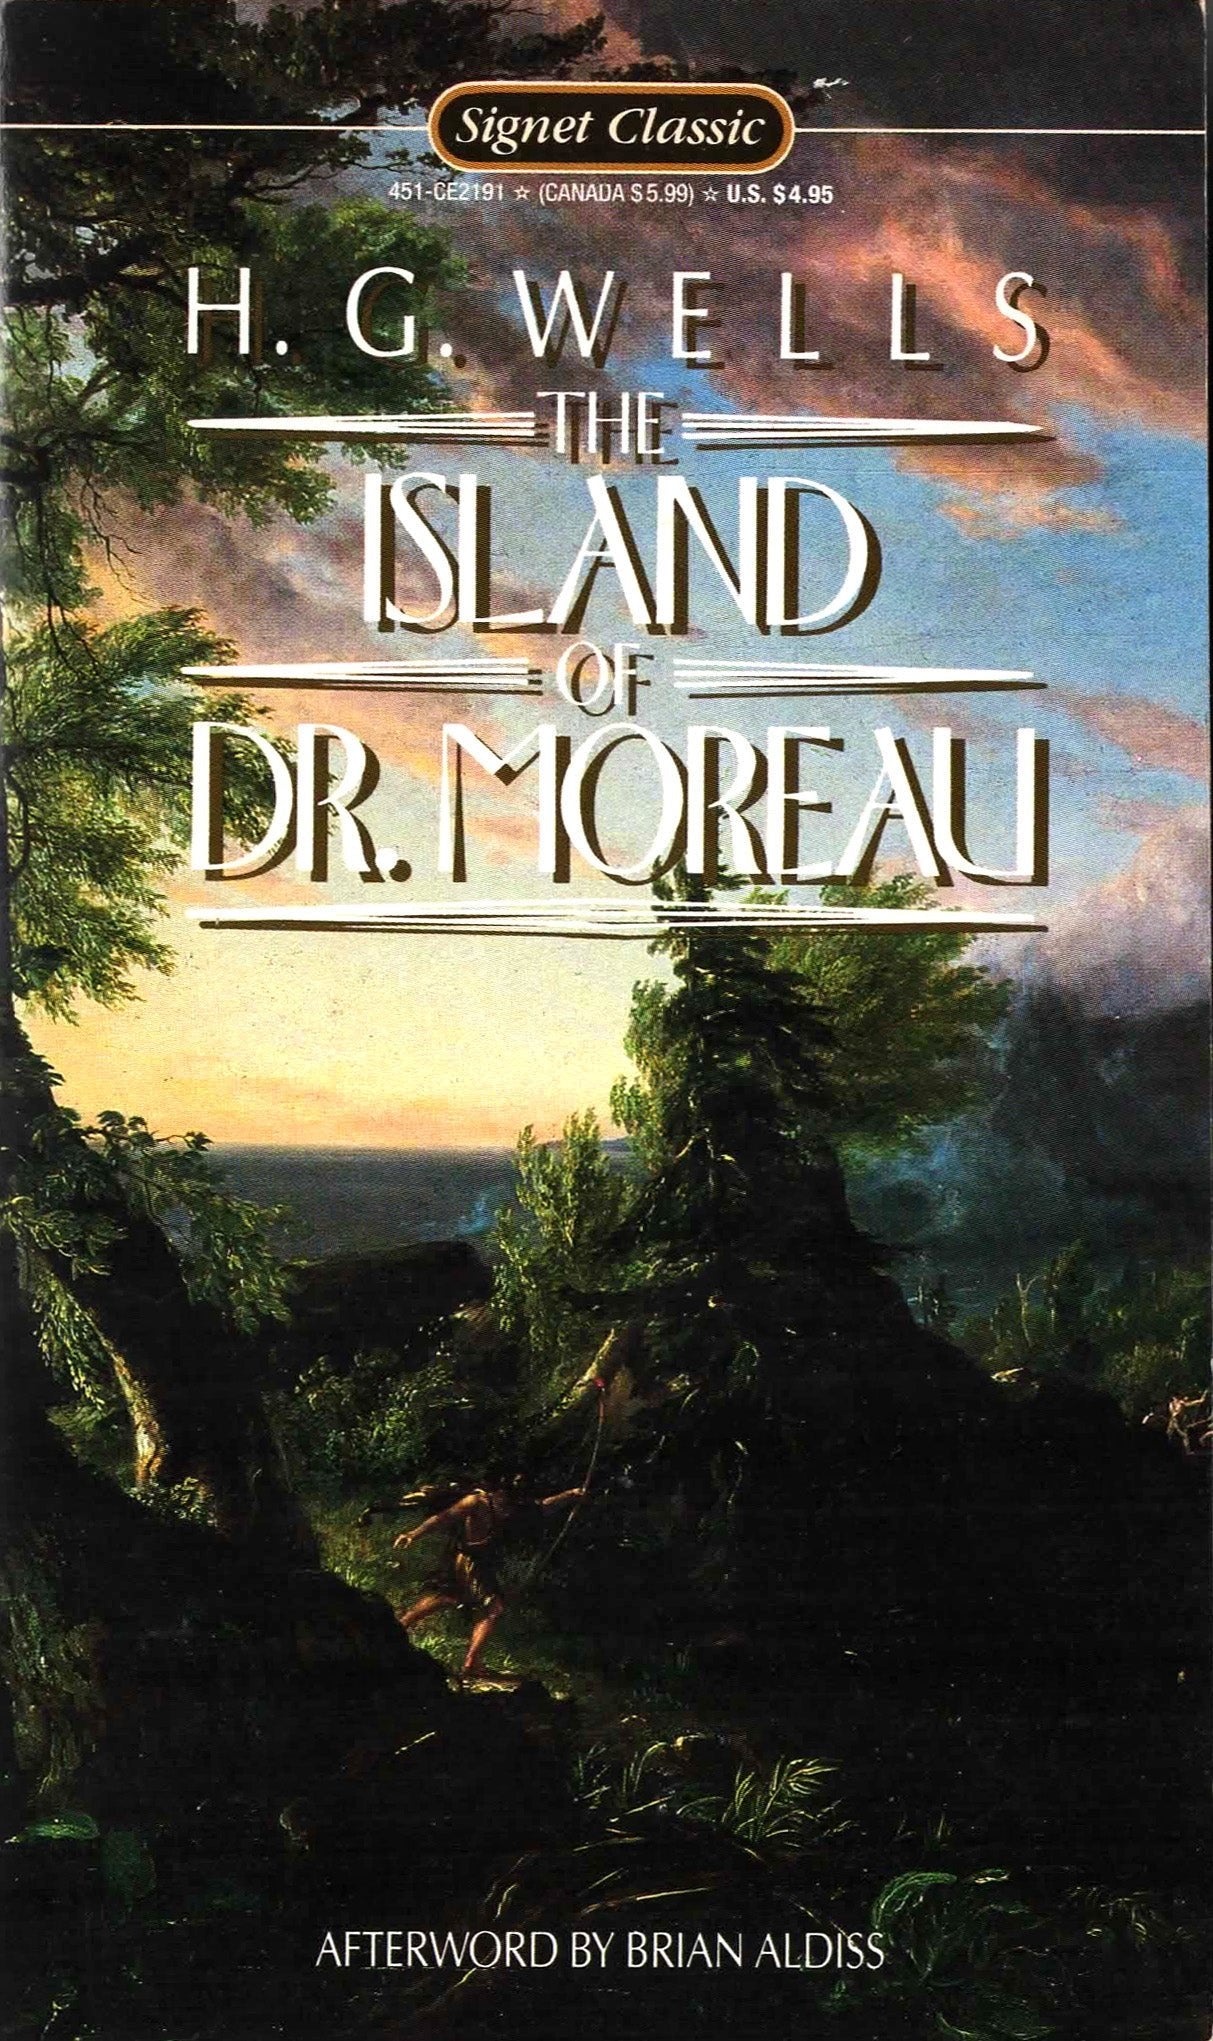 The Island of Dr. Moreau by H. G. Wells